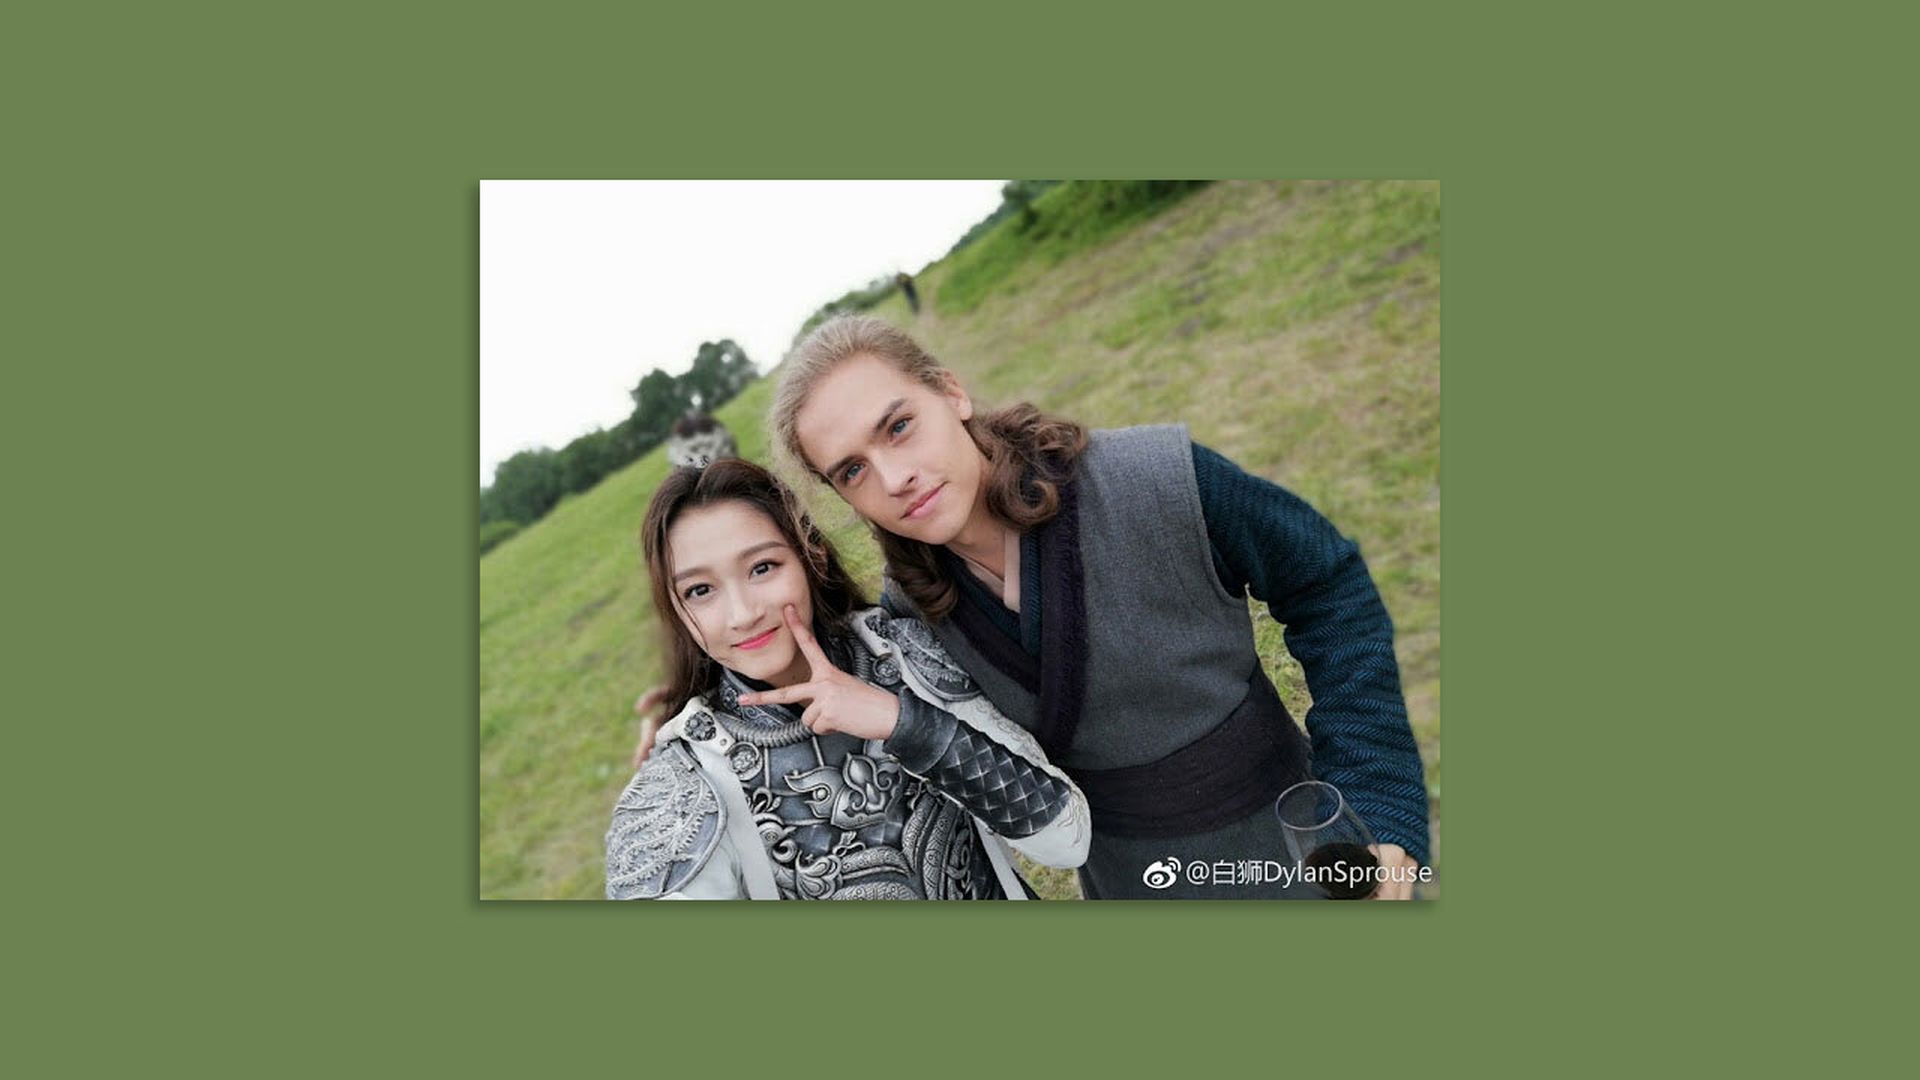 Photo of Dylan Sprouse and Guan Xiaotong